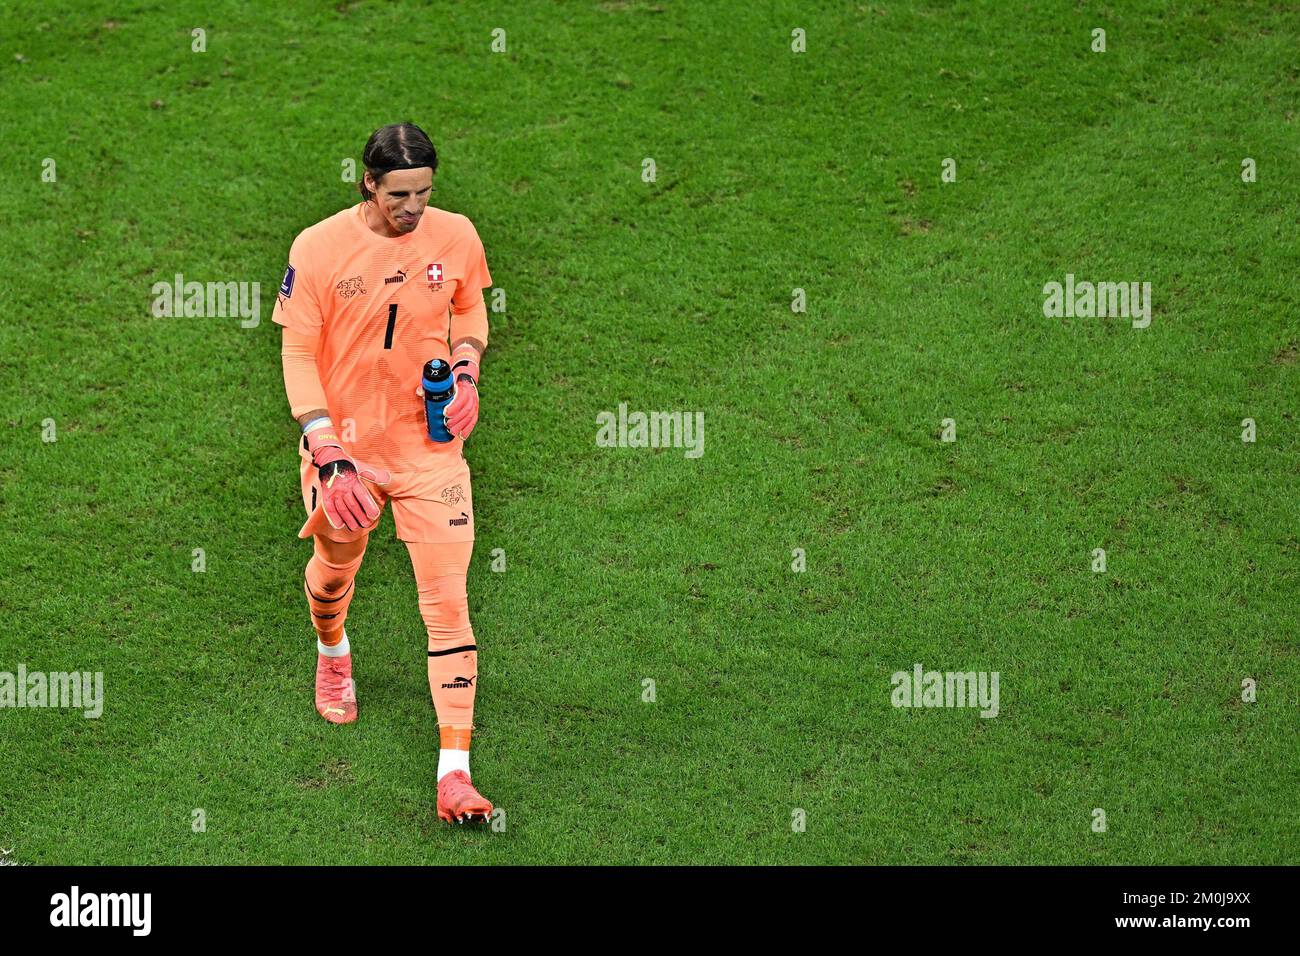 Lusail, Qatar. 6th Dec, 2022. Yann Sommer, goalkeeper of Switzerland, leaves the pitch after first half of the Round of 16 match between Portugal and Switzerland of the 2022 FIFA World Cup at Lusail Stadium in Lusail, Qatar, Dec. 6, 2022. Credit: Xin Yuewei/Xinhua/Alamy Live News Stock Photo